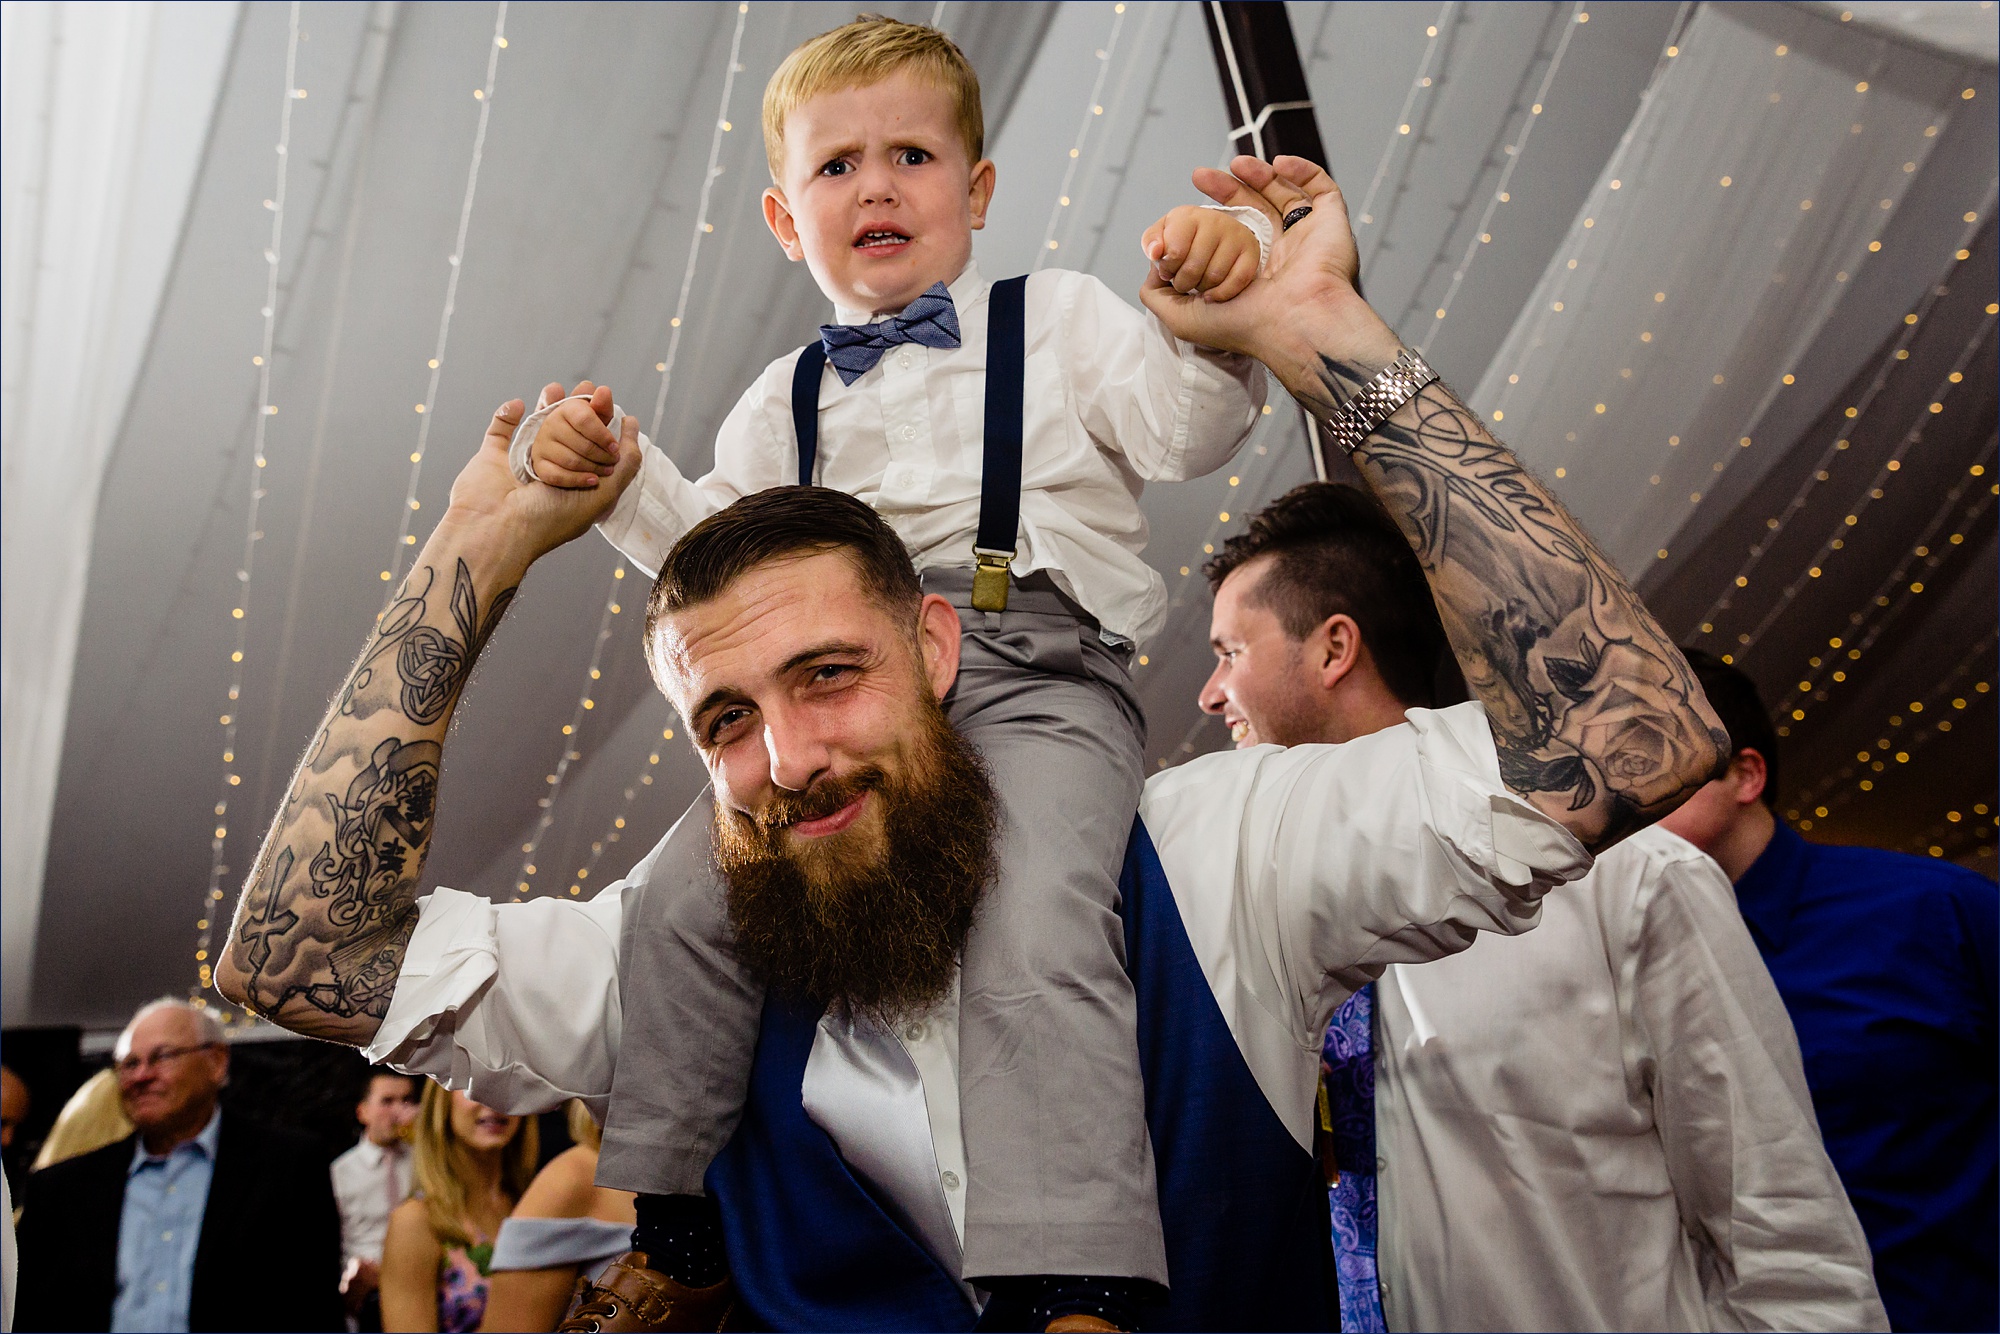 The groom's son isn't too pumped about the wedding reception